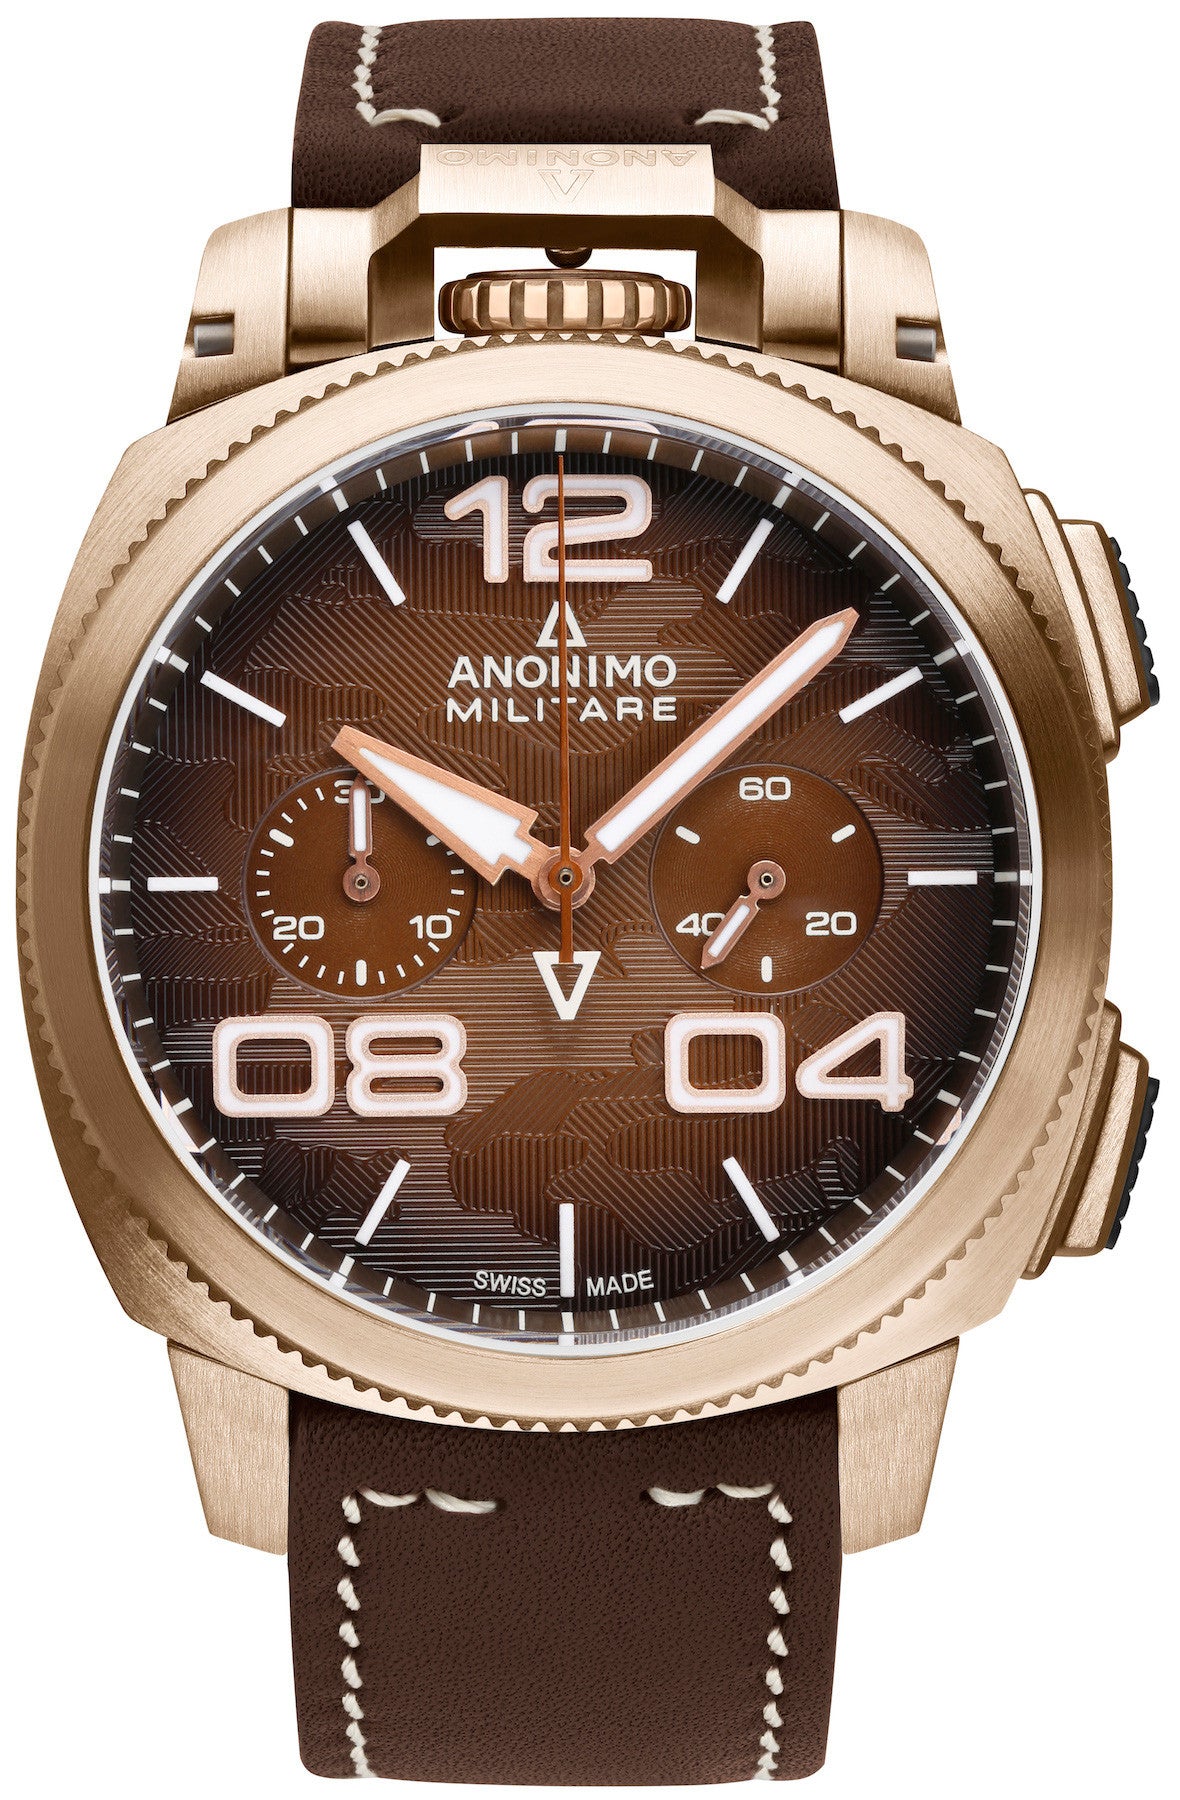 Anonimo Watch Militare Alpina Camouflage Brown Limited Edition